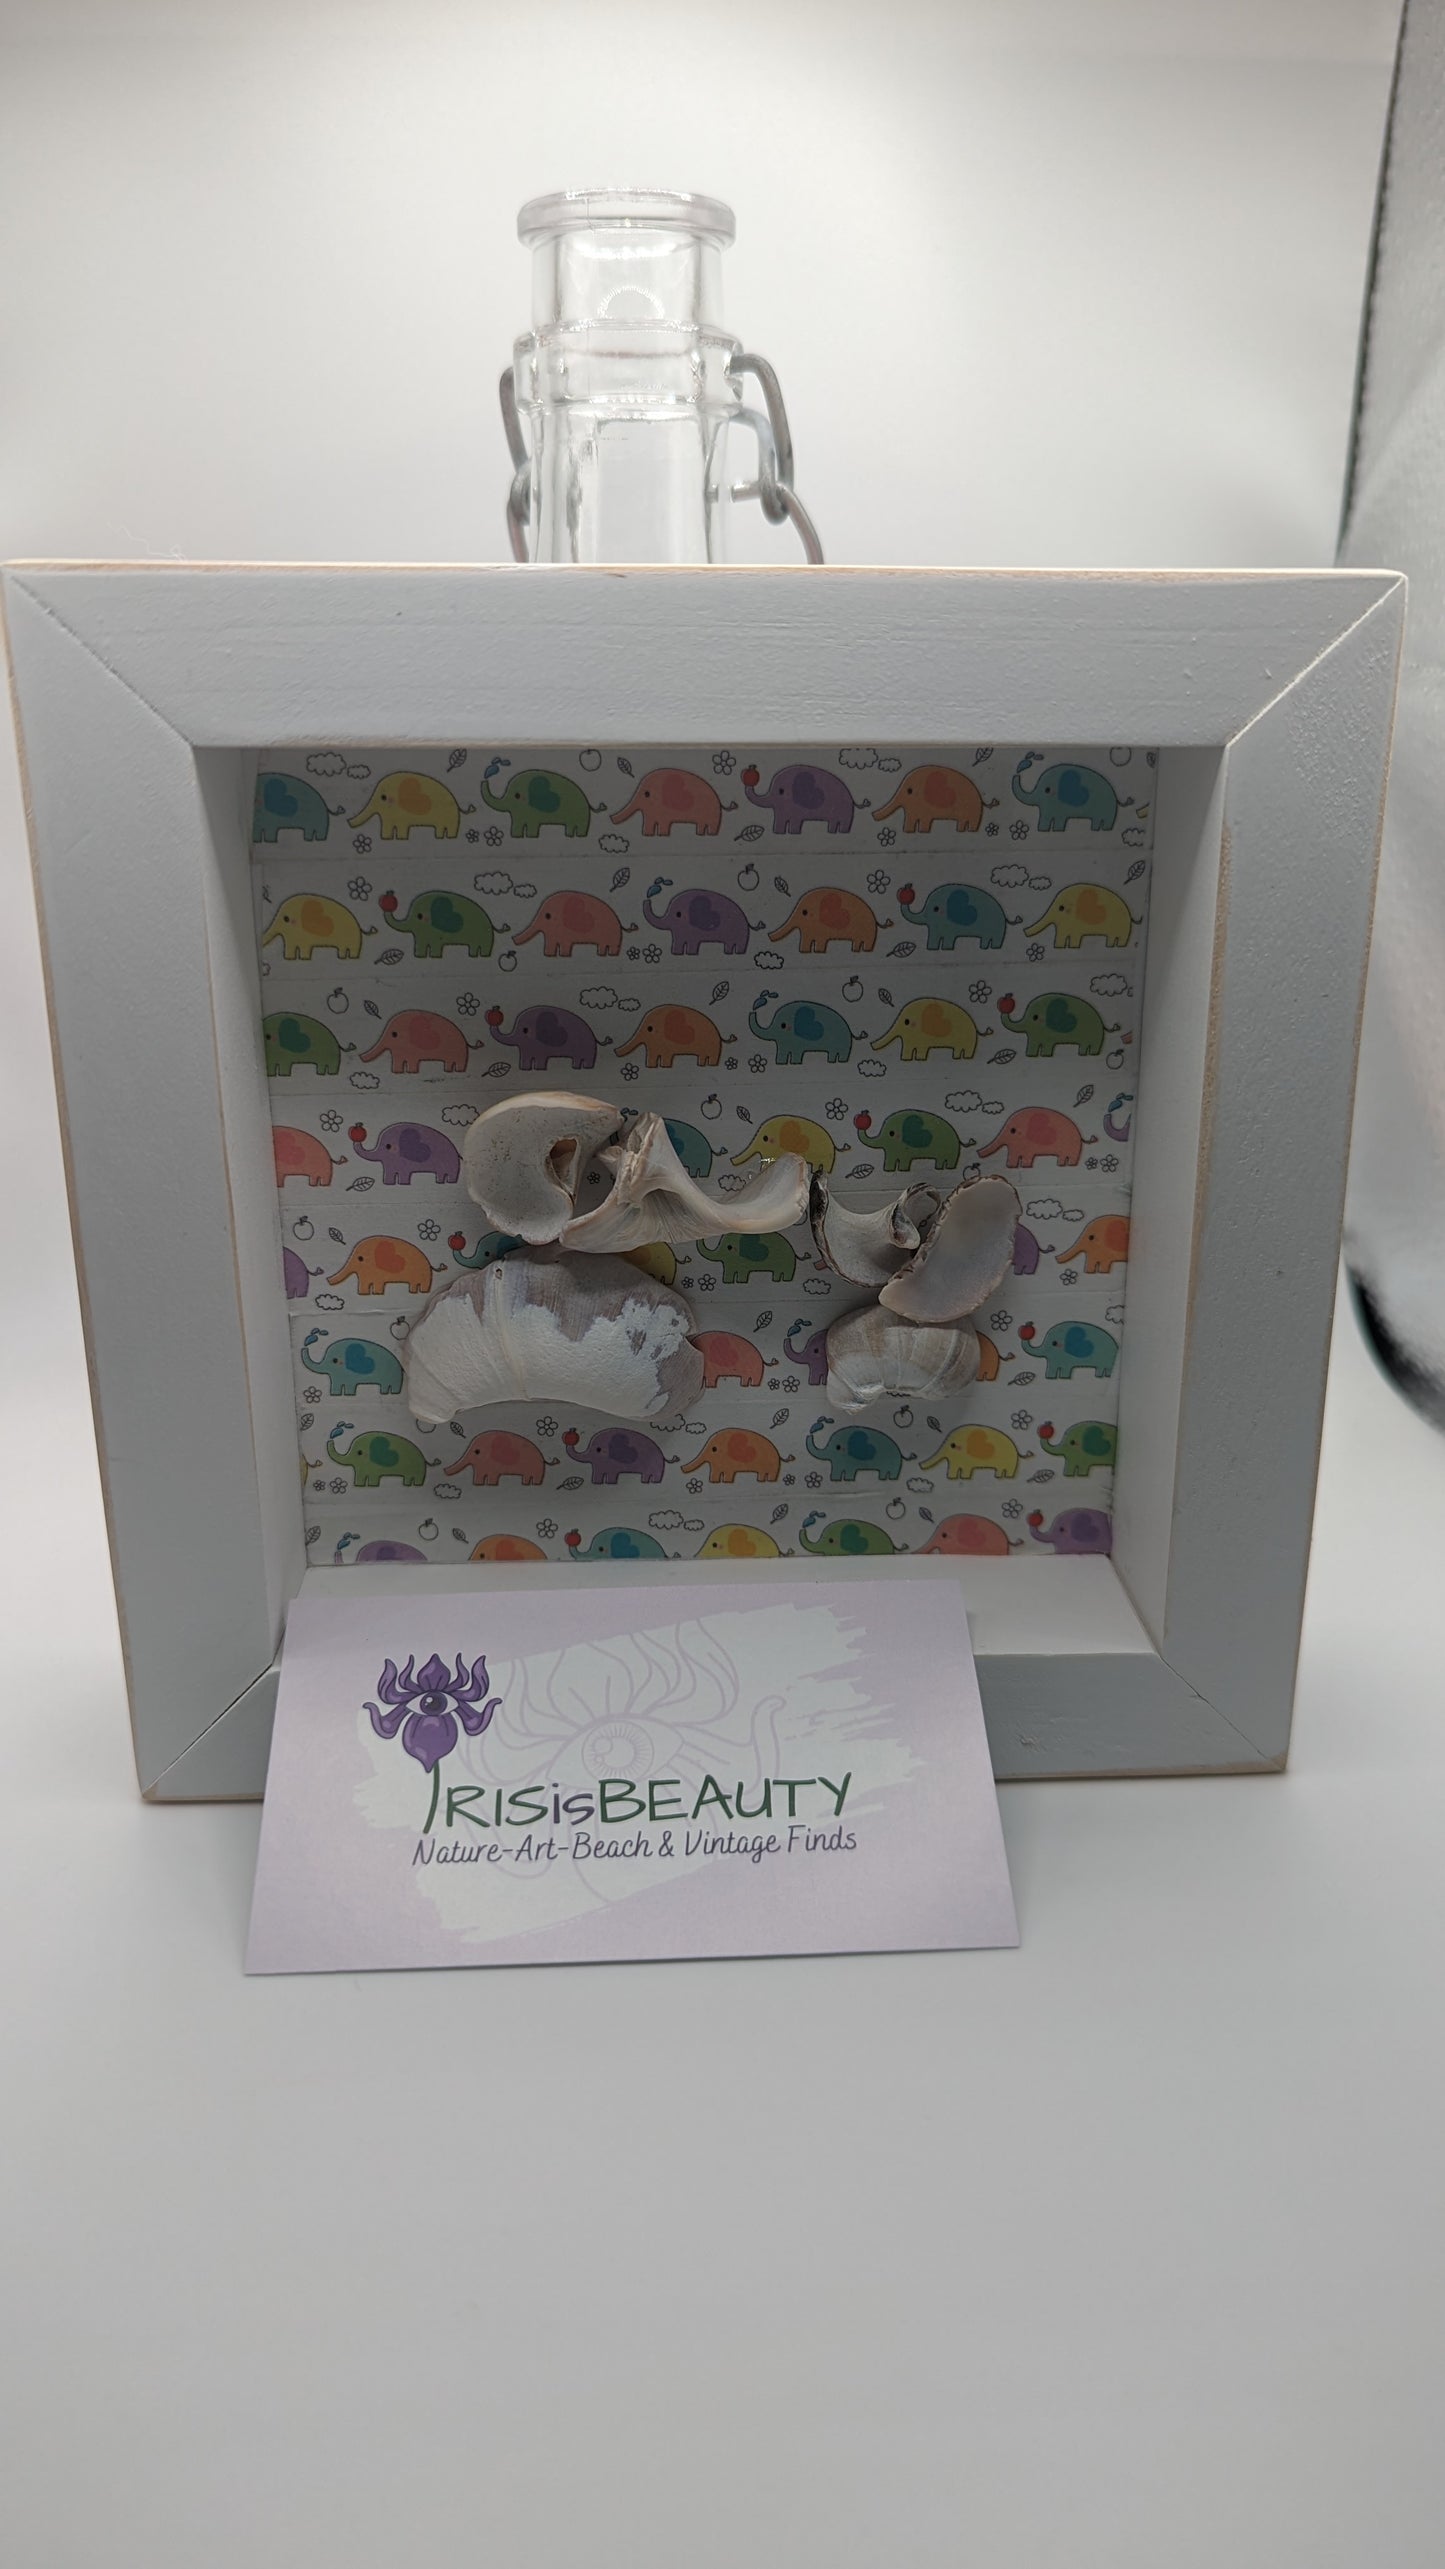 Framed art, Two elephants and washi tape, seashell pieces art, distressed white shadow box frame